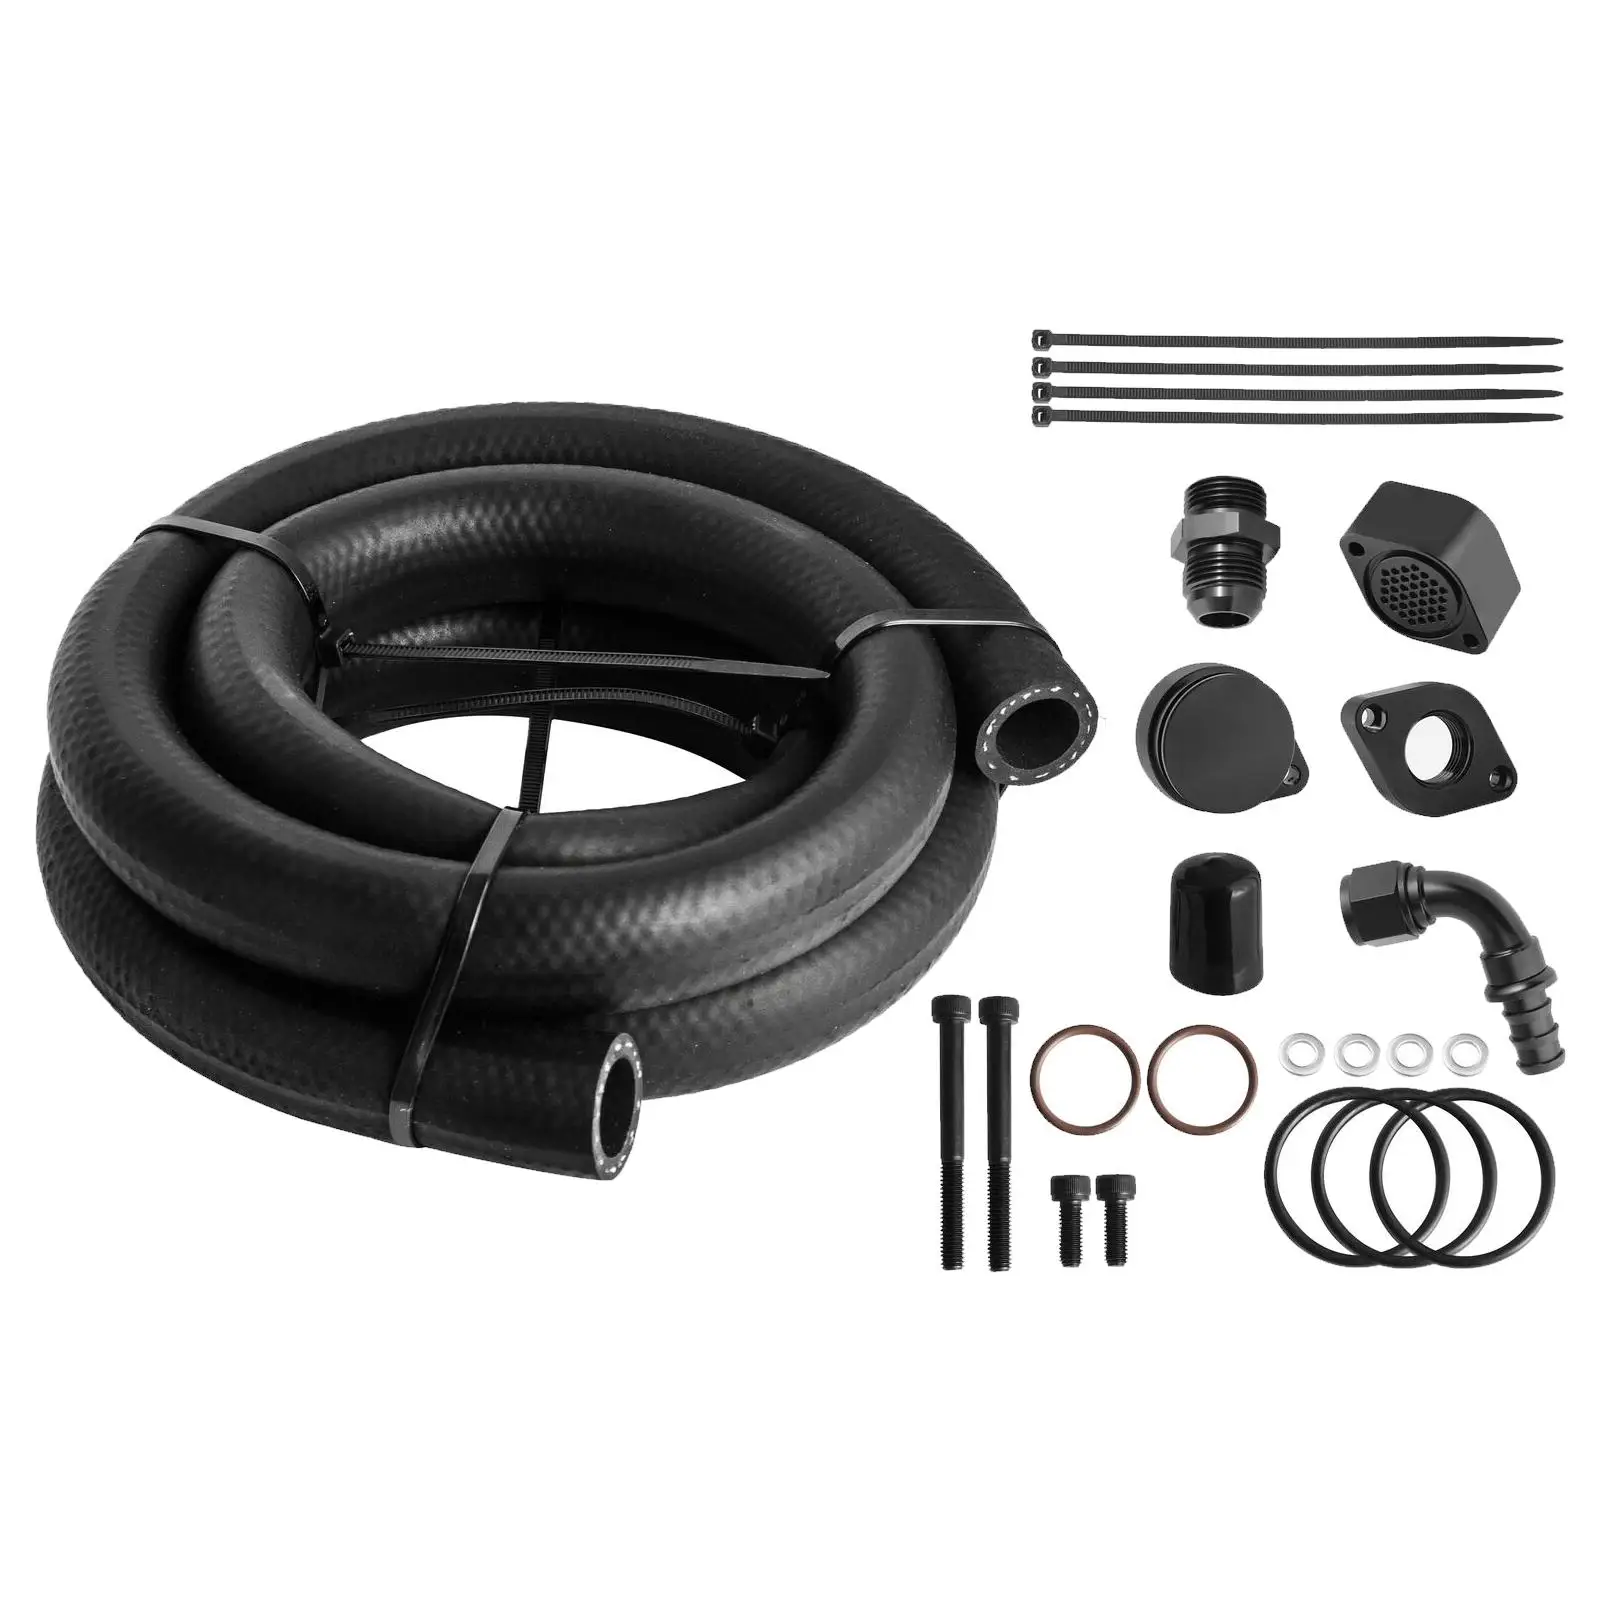 Pcv Reroute Engine Ventilation Kit Easy Installation for Ford Super Duty 11-20 6.7L Powerstroke Diesel F-450 F750 Accessory